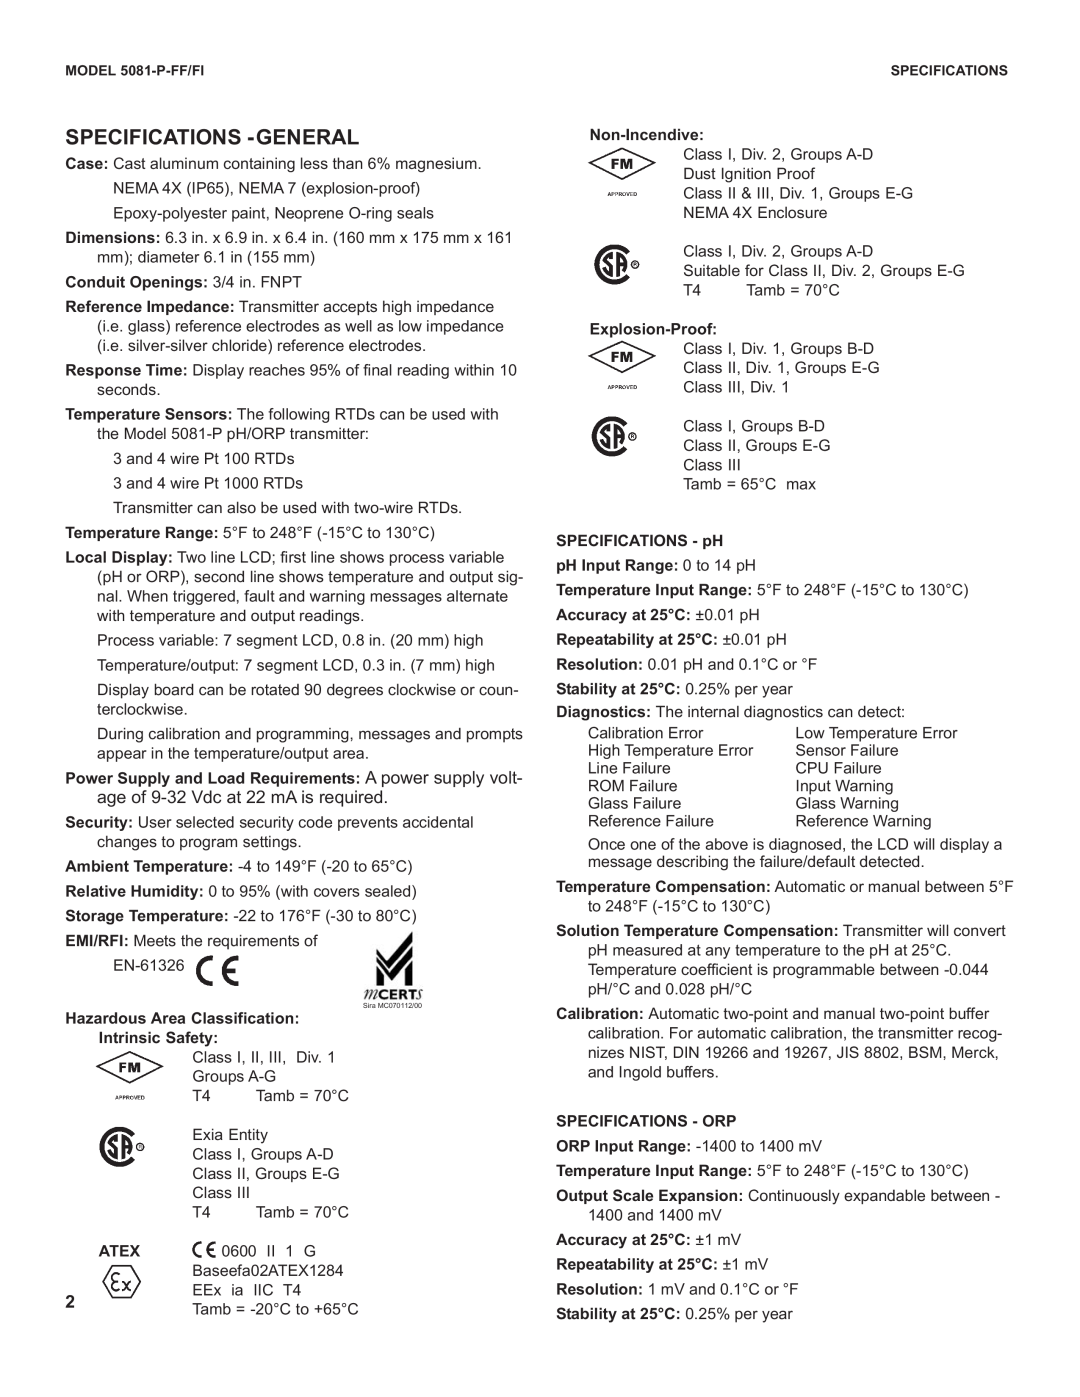 Emerson 5081-P-FF/FI instruction sheet Specifications -General 